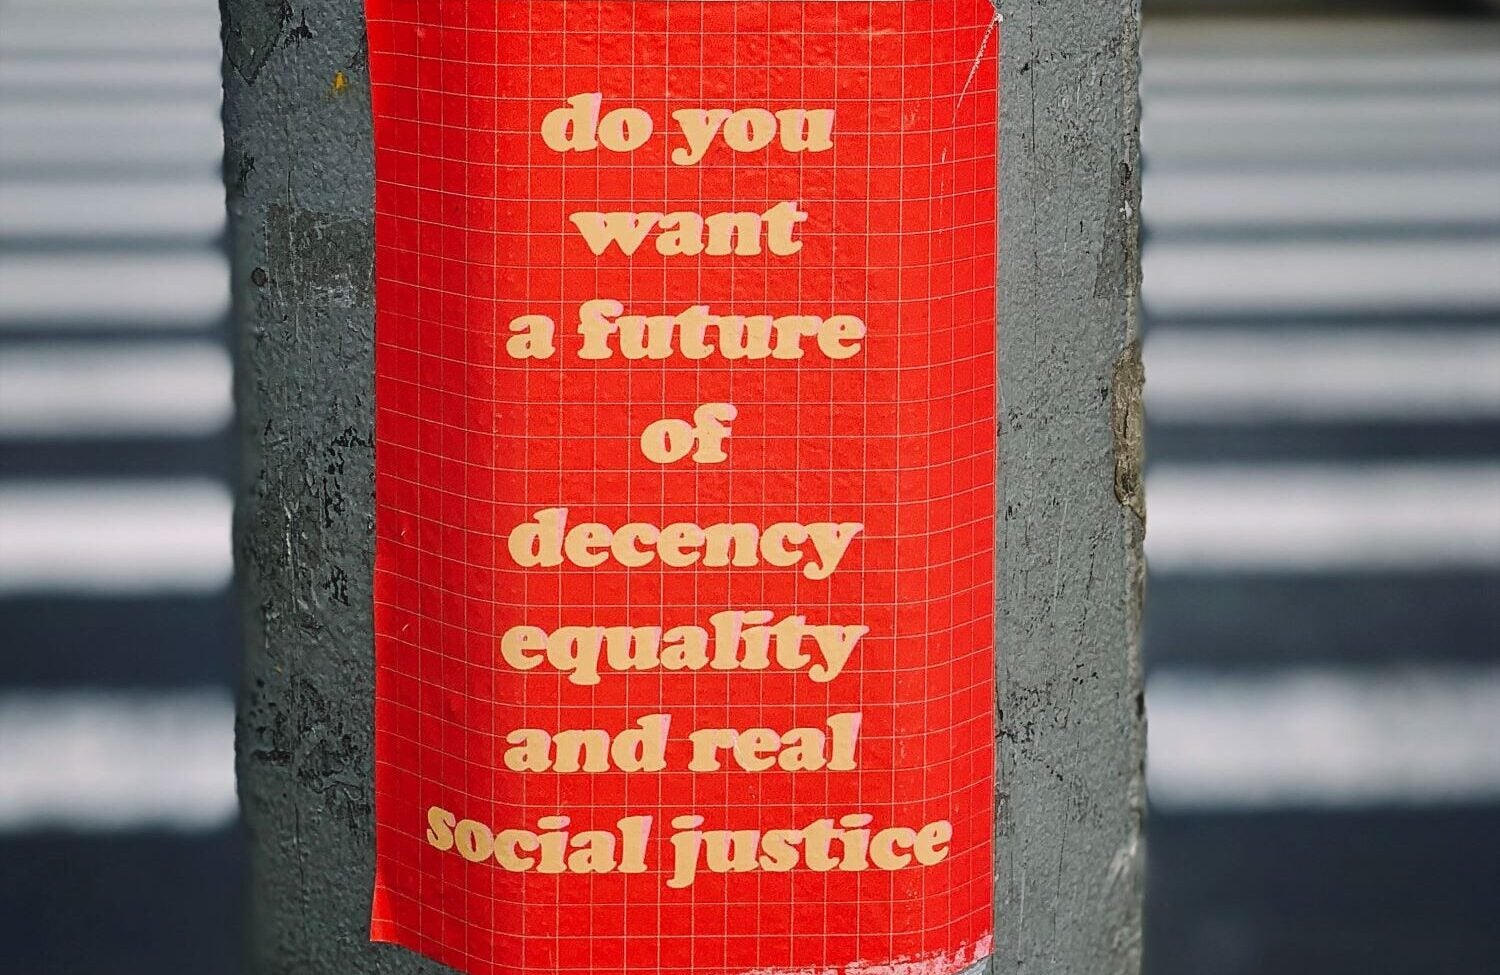 sign that says do you want a future of decency equality and real social justice